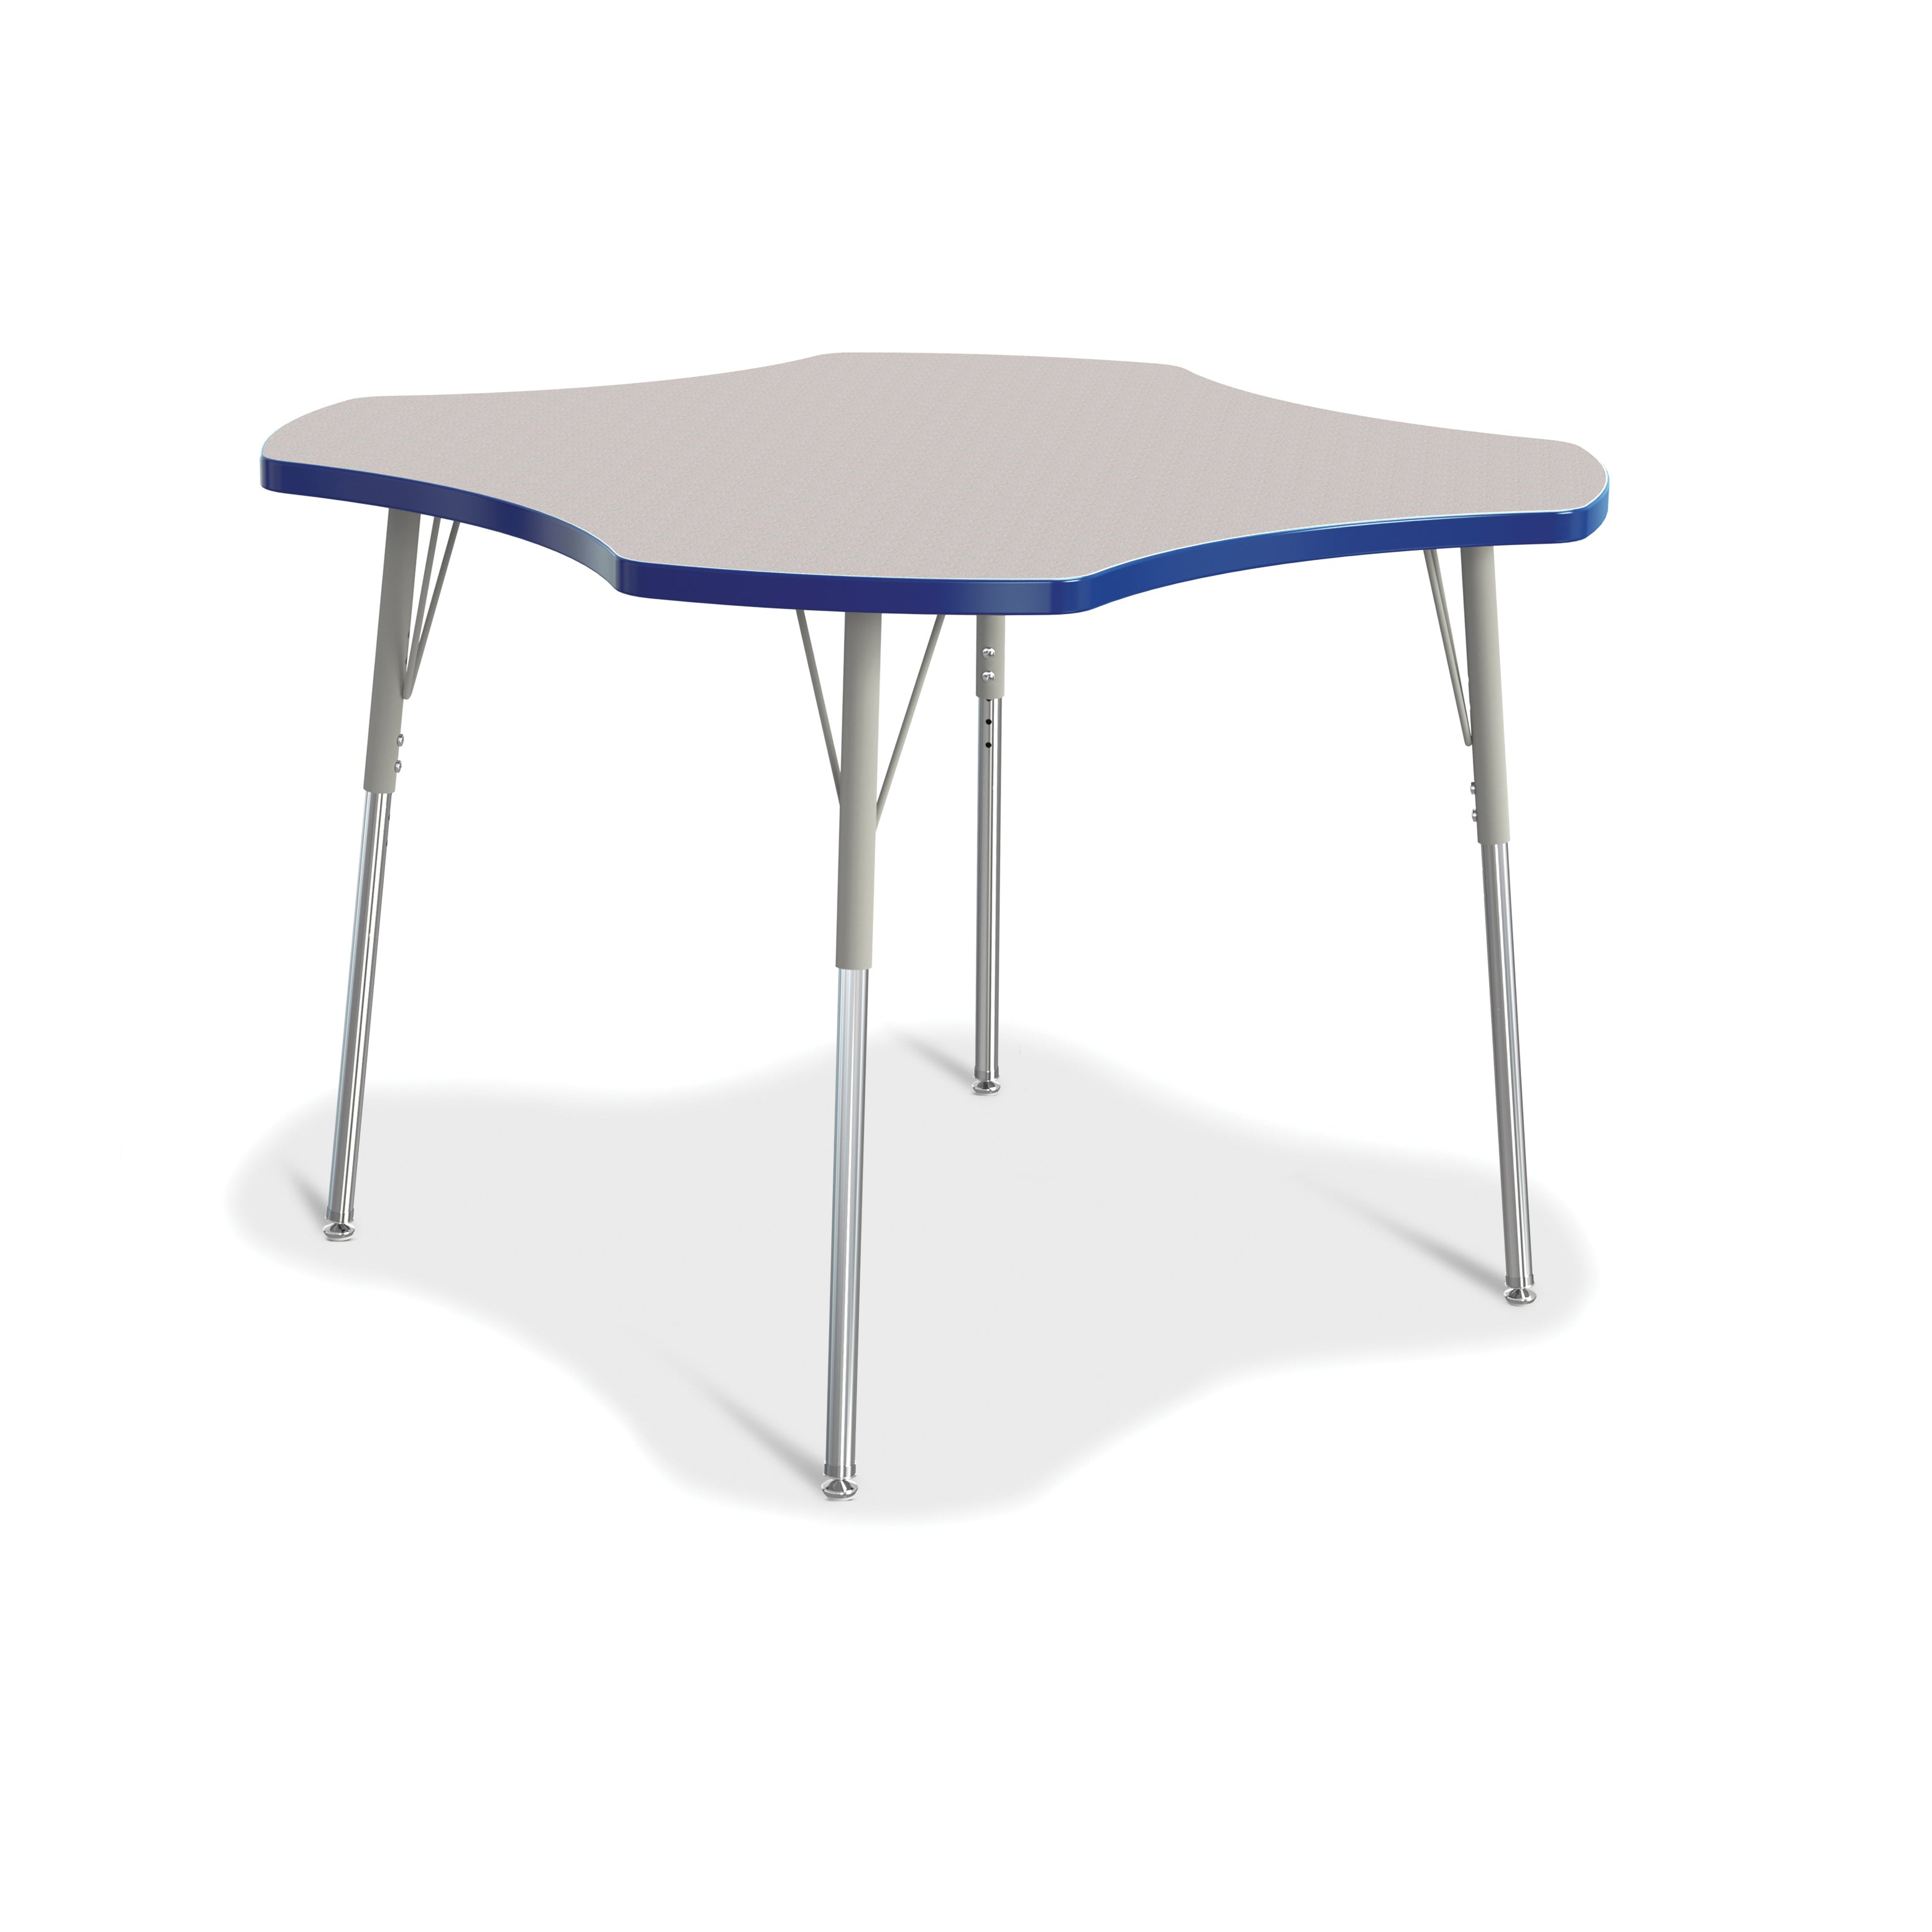 6453JCA003, Berries Four Leaf Activity Table, A-height - Freckled Gray/Blue/Gray